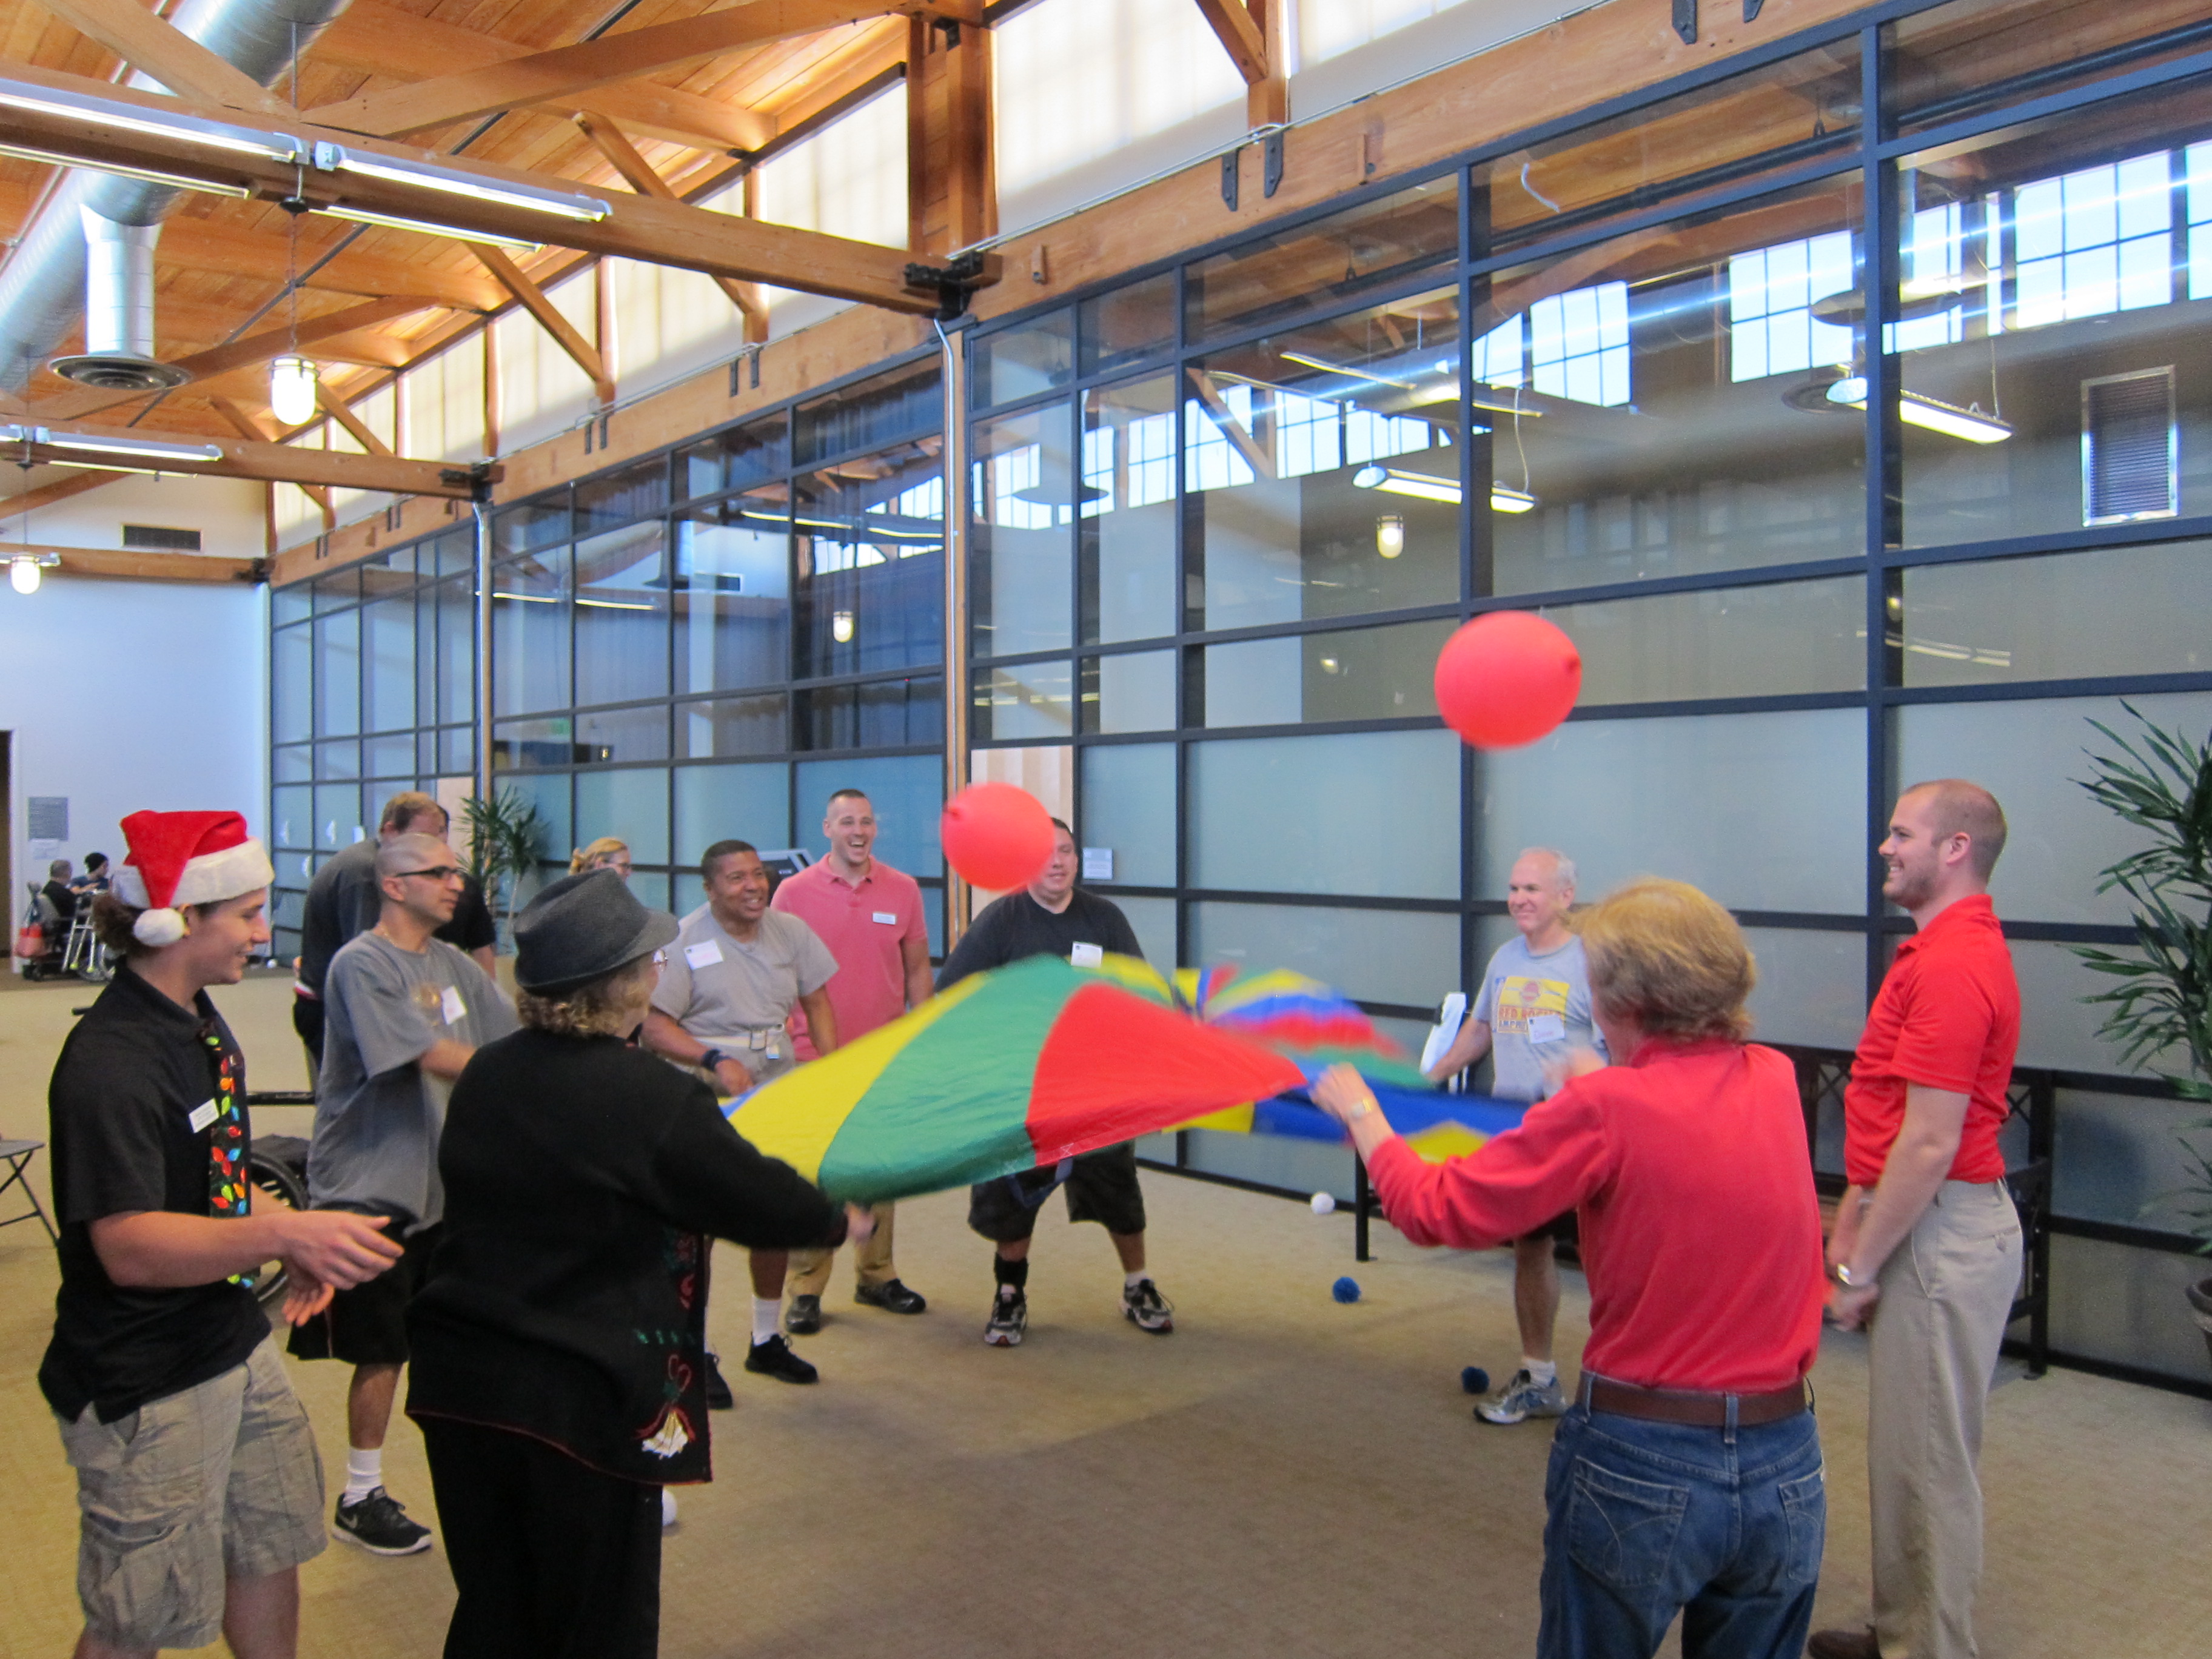 Stroke survivors at Chapman University's Stroke Boot Camp launch balloons off a colorful parachute as part of their physical therapy.